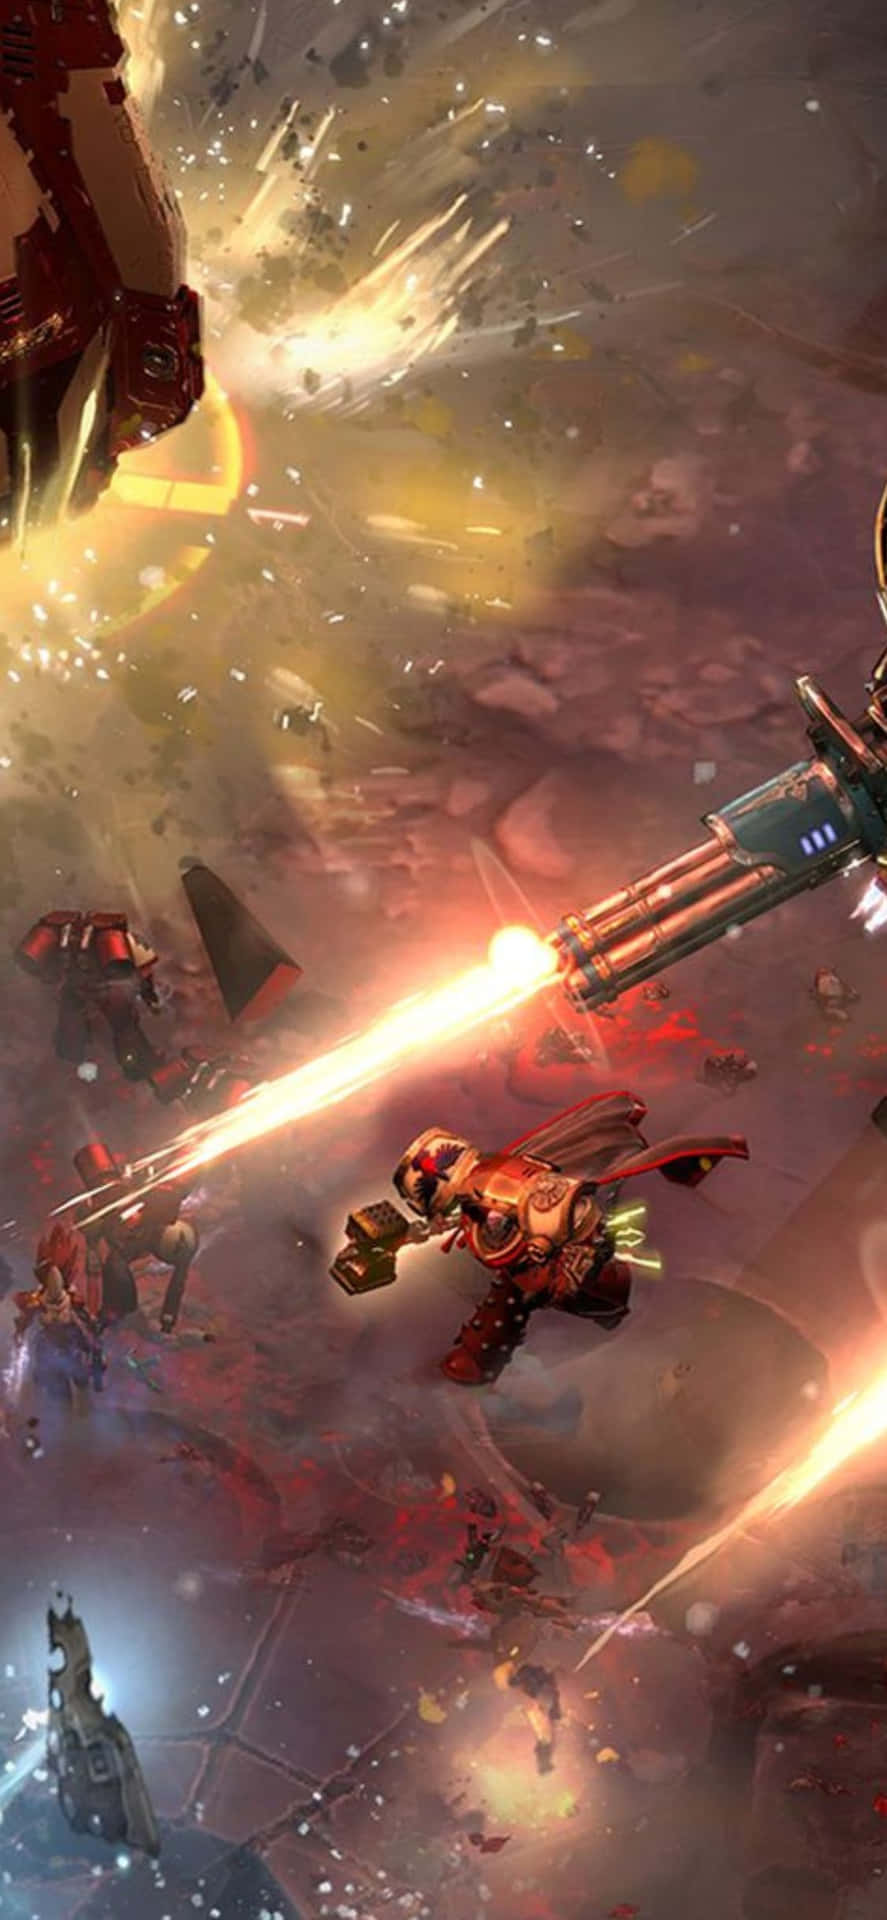 An epic scene from the game "Dawn of War III".